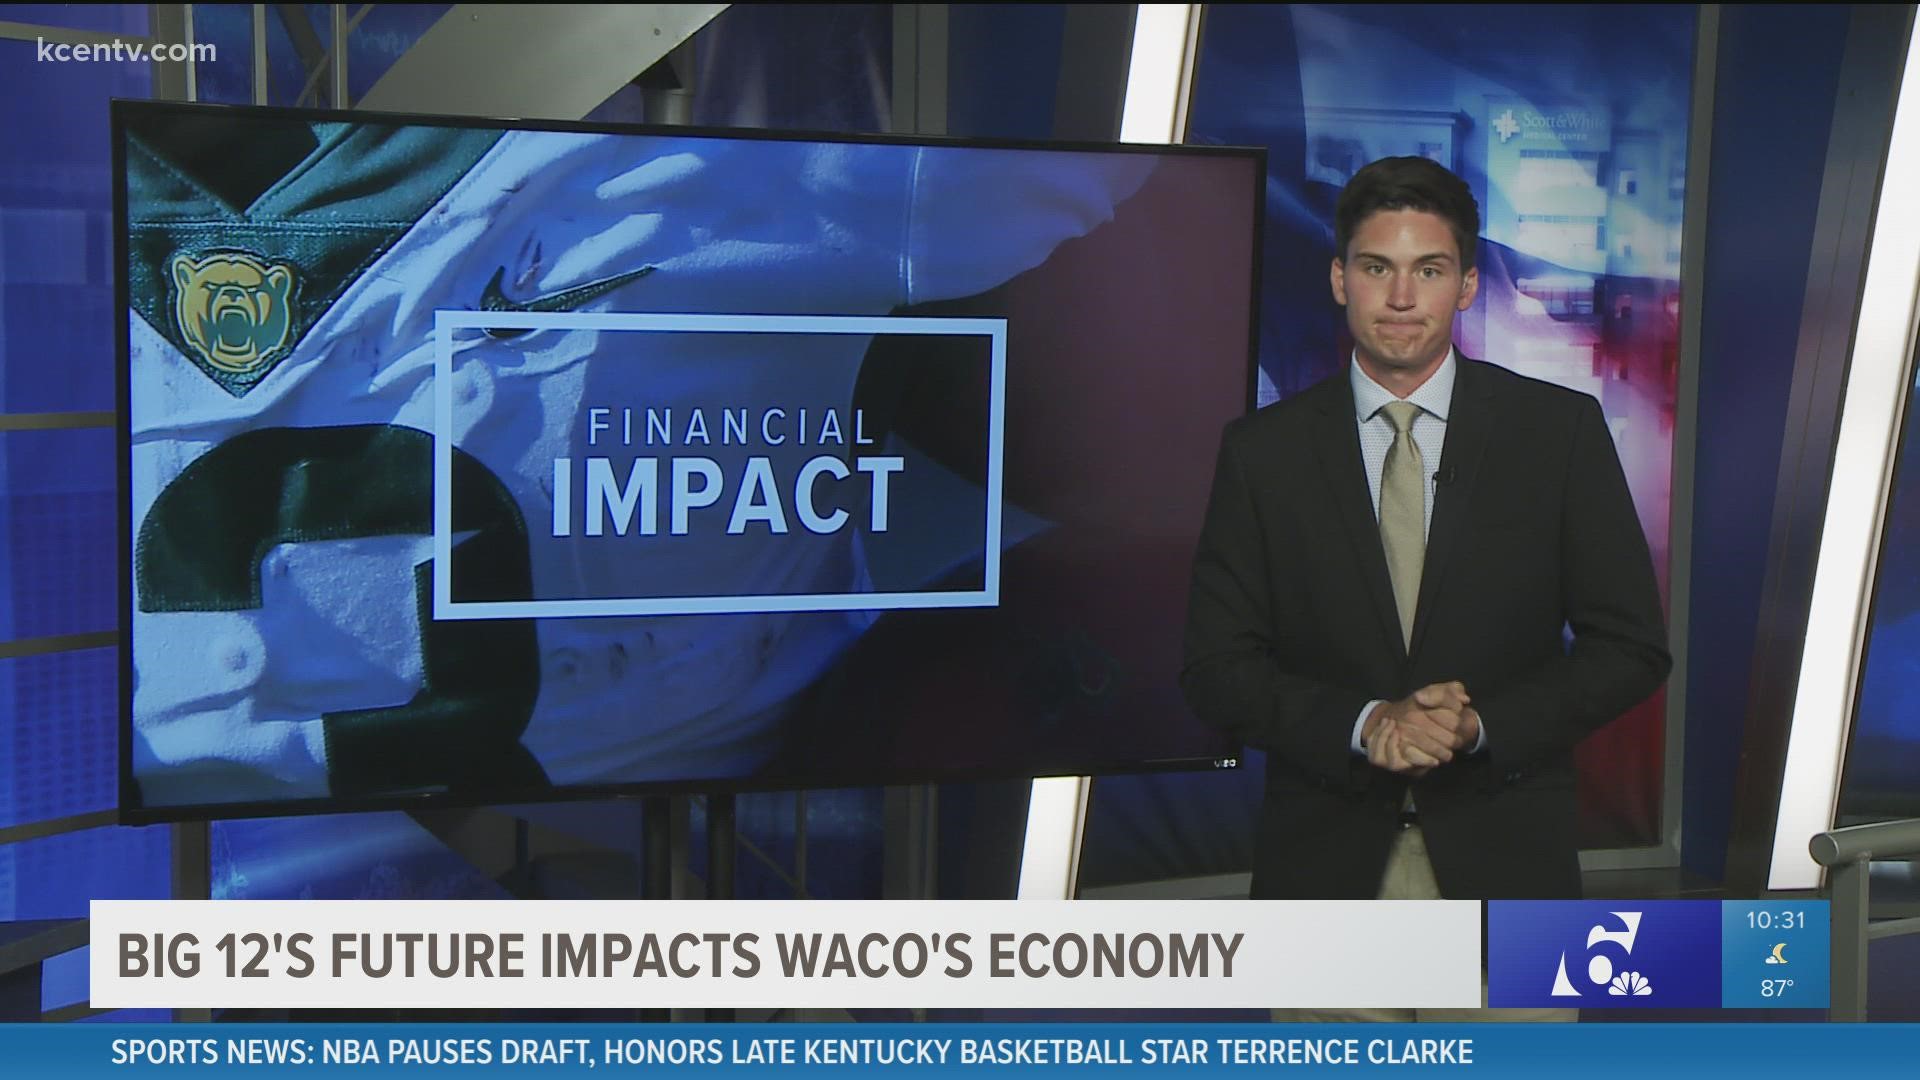 The city of Waco could experience a financial hit with new Big 12 changes.